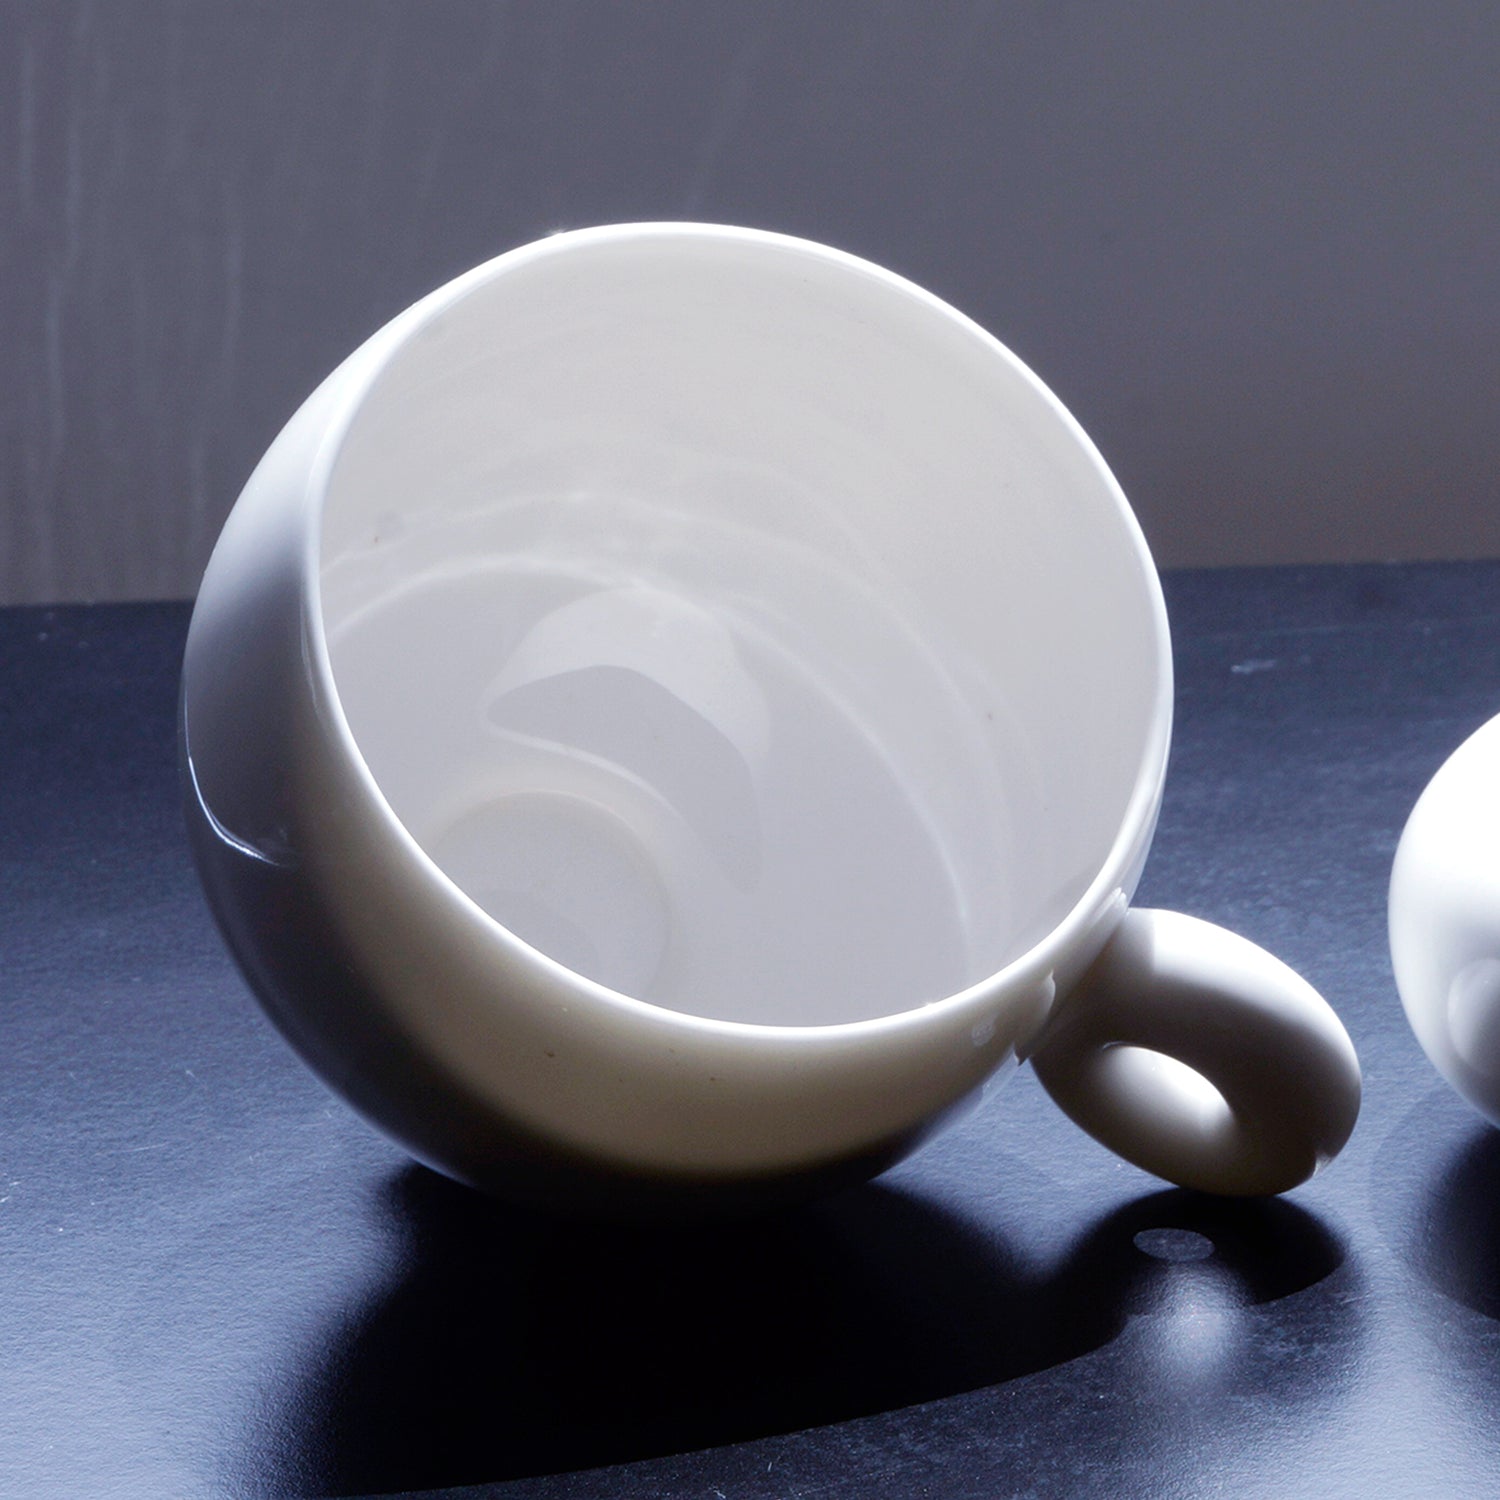 The Eclipse_Cup Saucer Set